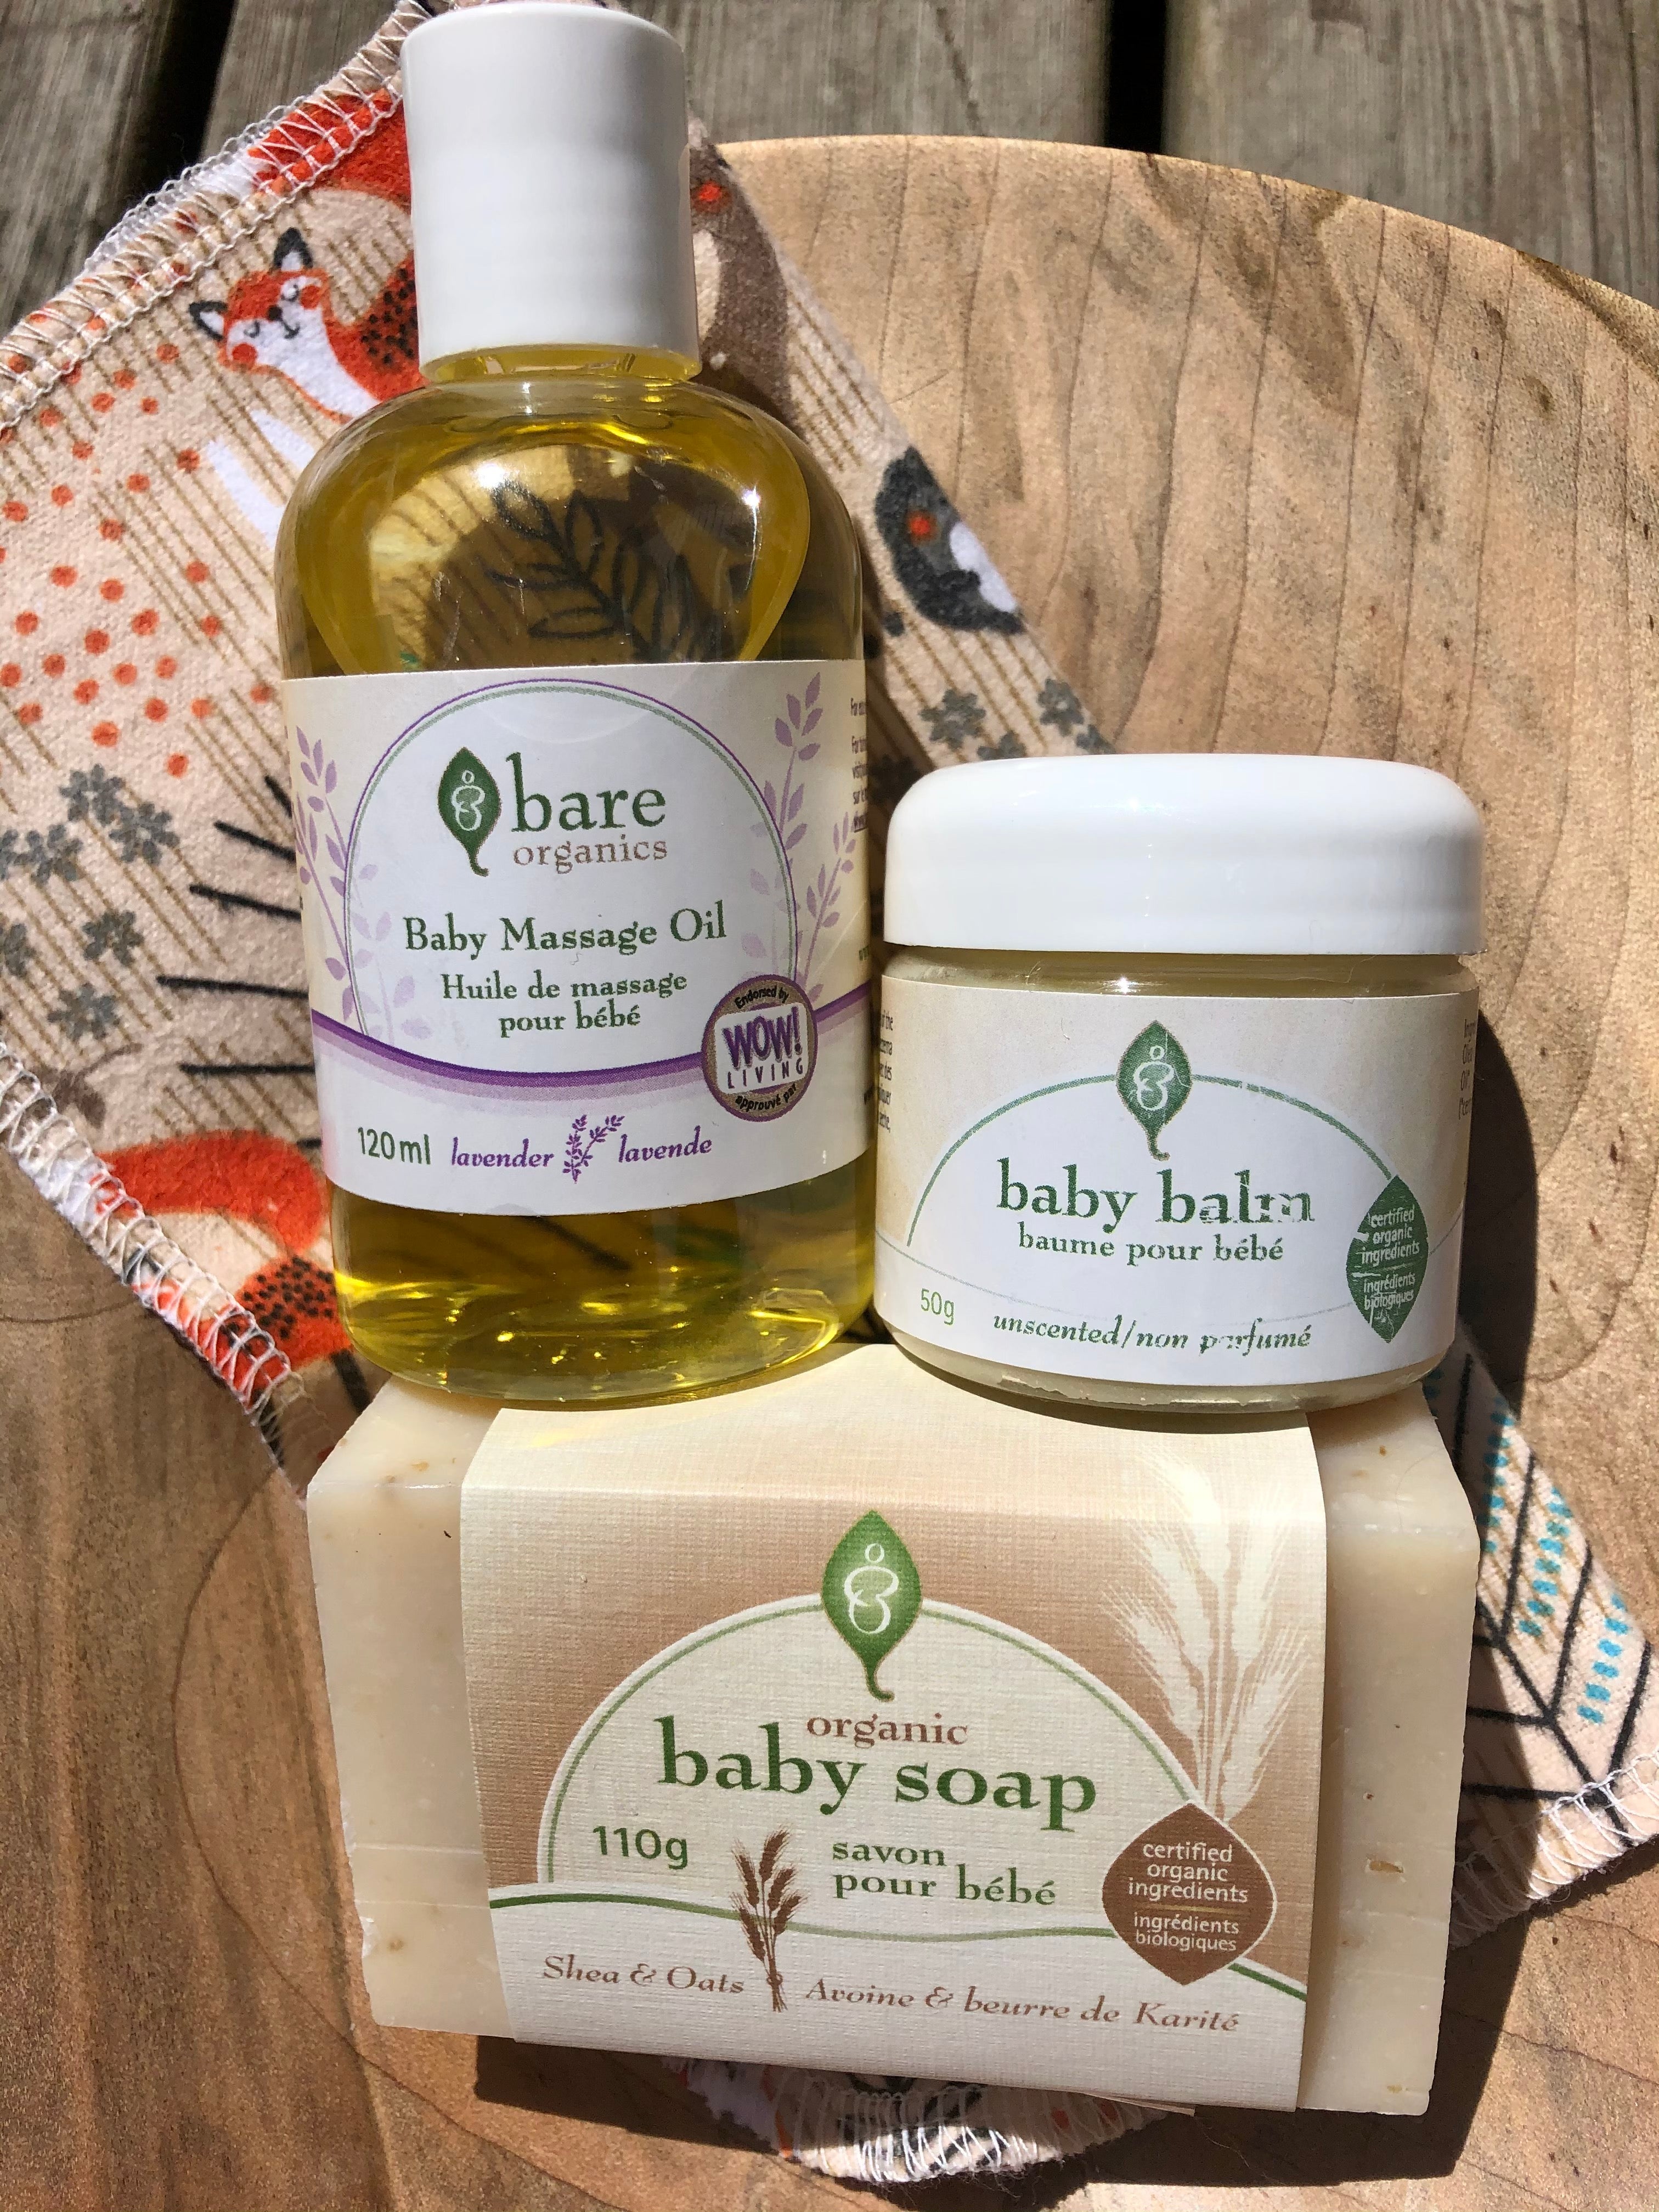 Why Choose Natures Child Baby Store? Learn All About Our Organic Natural Baby Products.